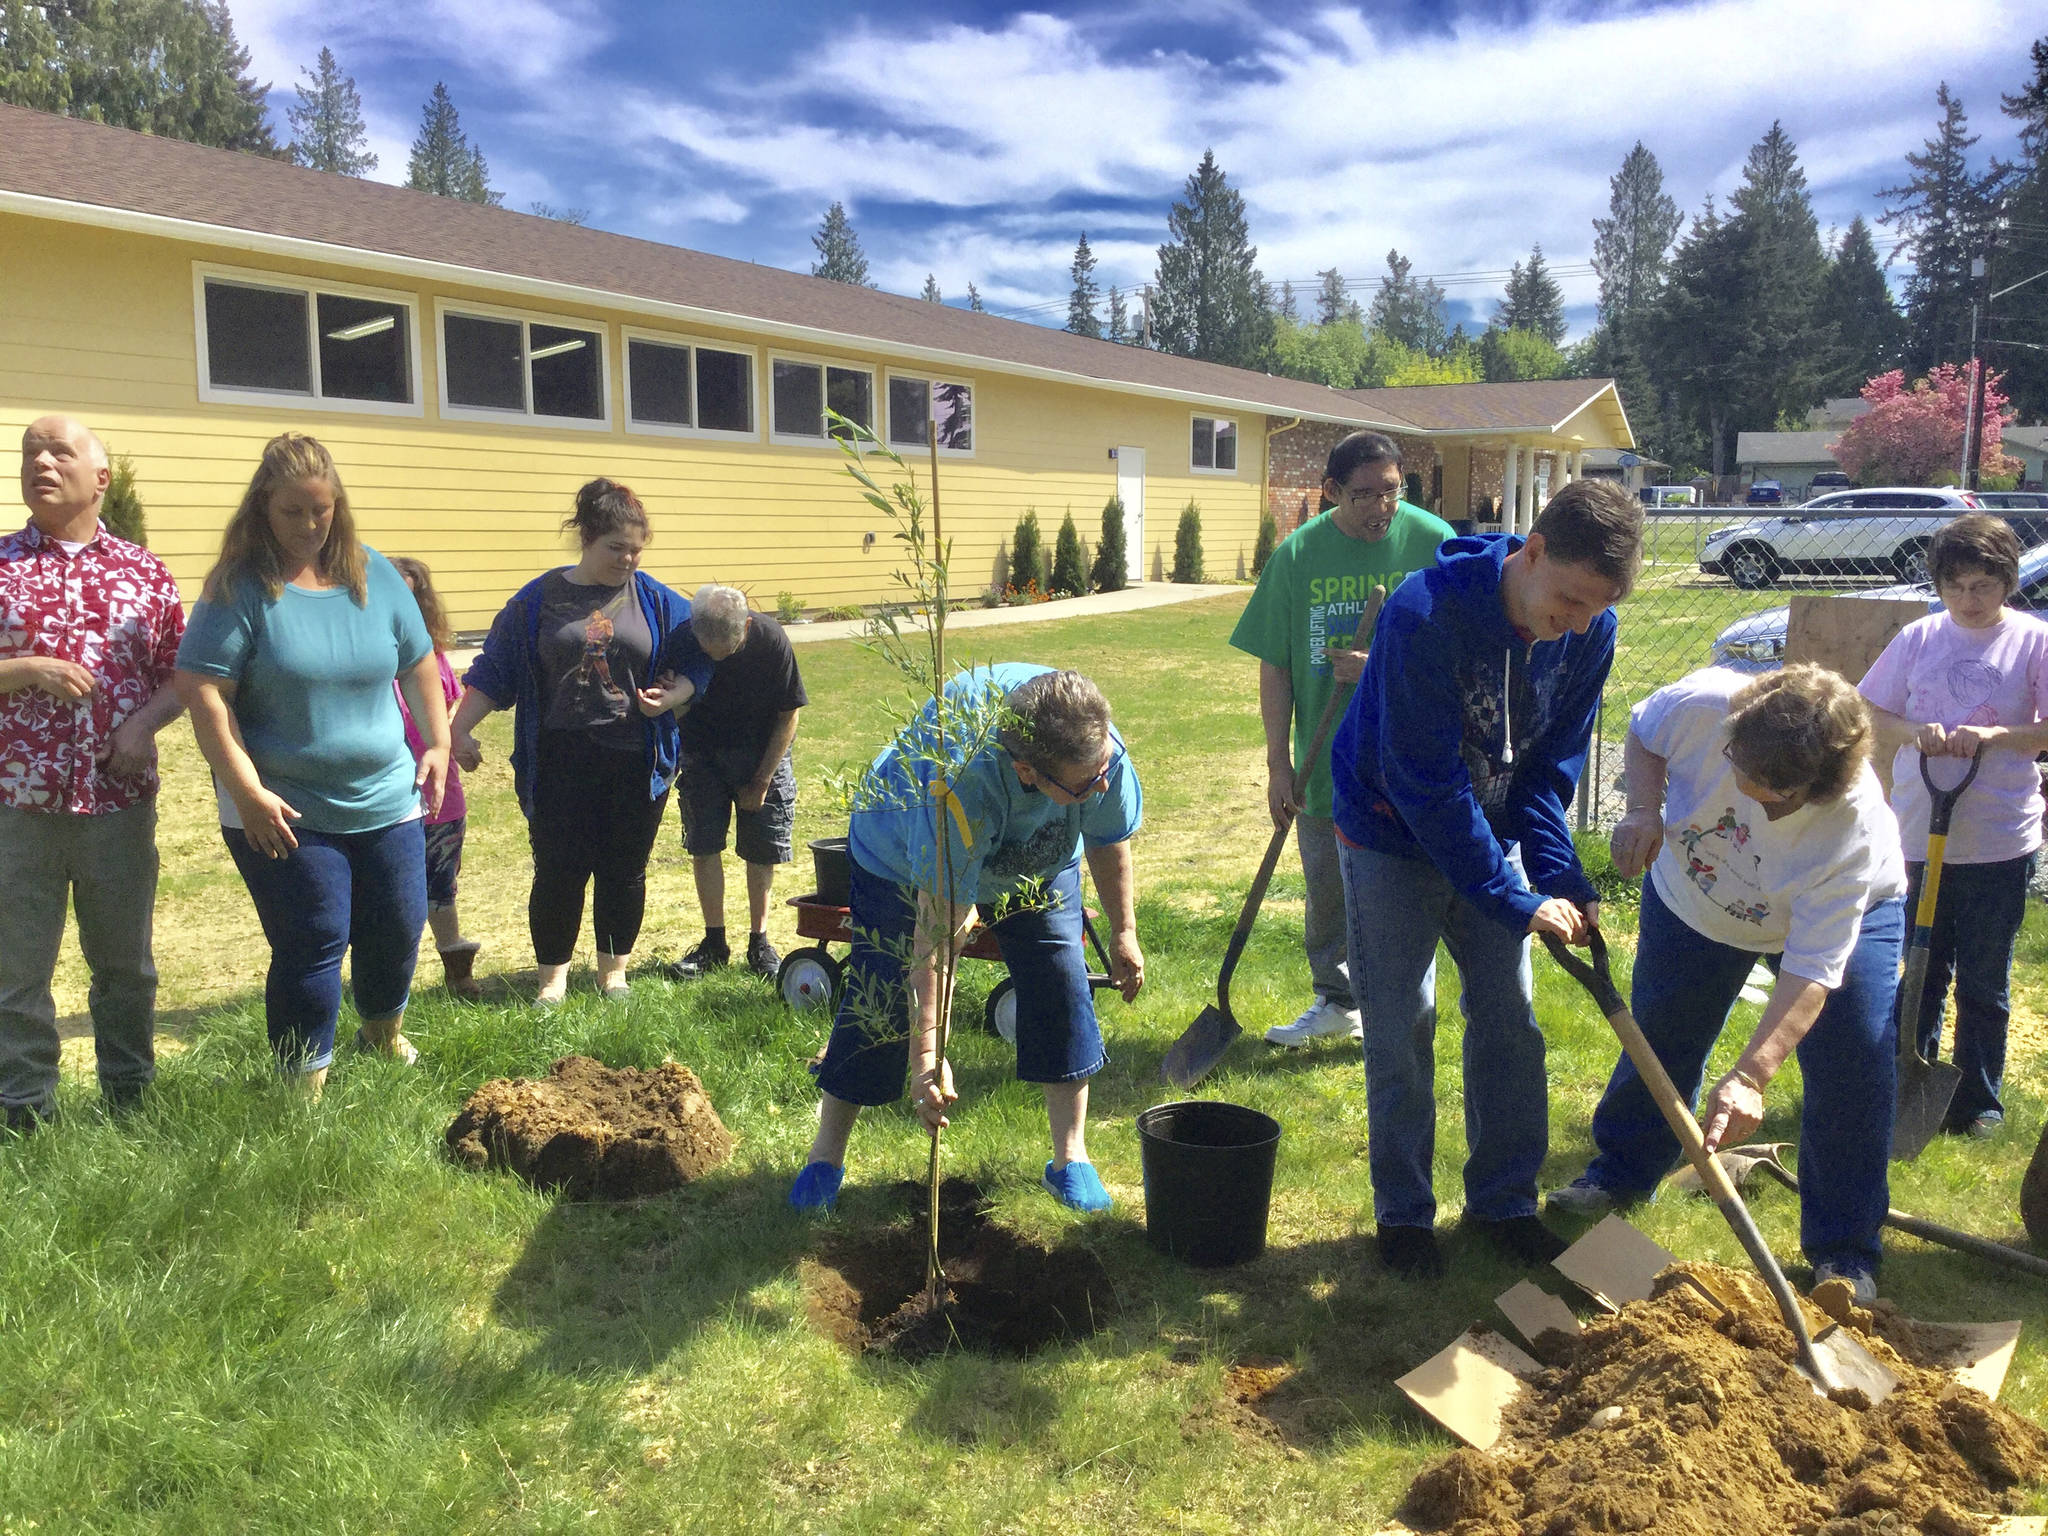 With help from Karen Harper, right, client Ray Molstad scoops a shovel of dirt to help caregiver Sue Williss plant a weeping willow in memory of her mother outside the newly-expanded Willow Place in Marysville, while other clients and staff from the recreation center for disabled adults wait their turn to help.